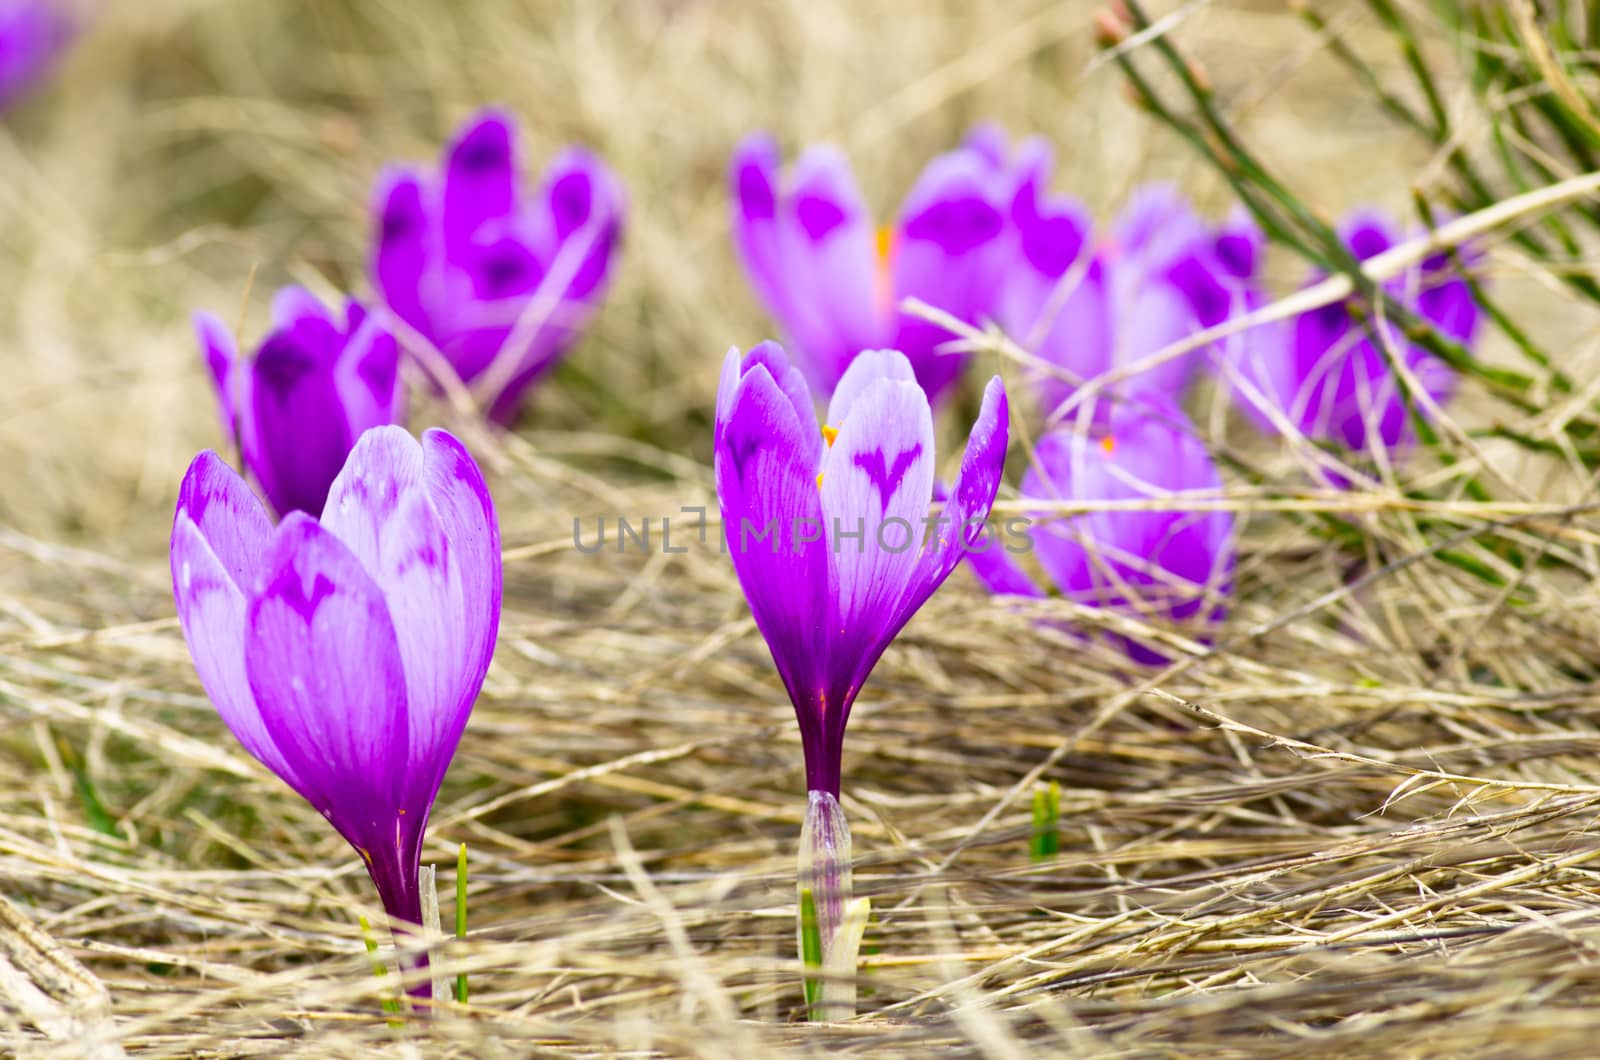 Spring crocus flowers on green natural background. Selective focus